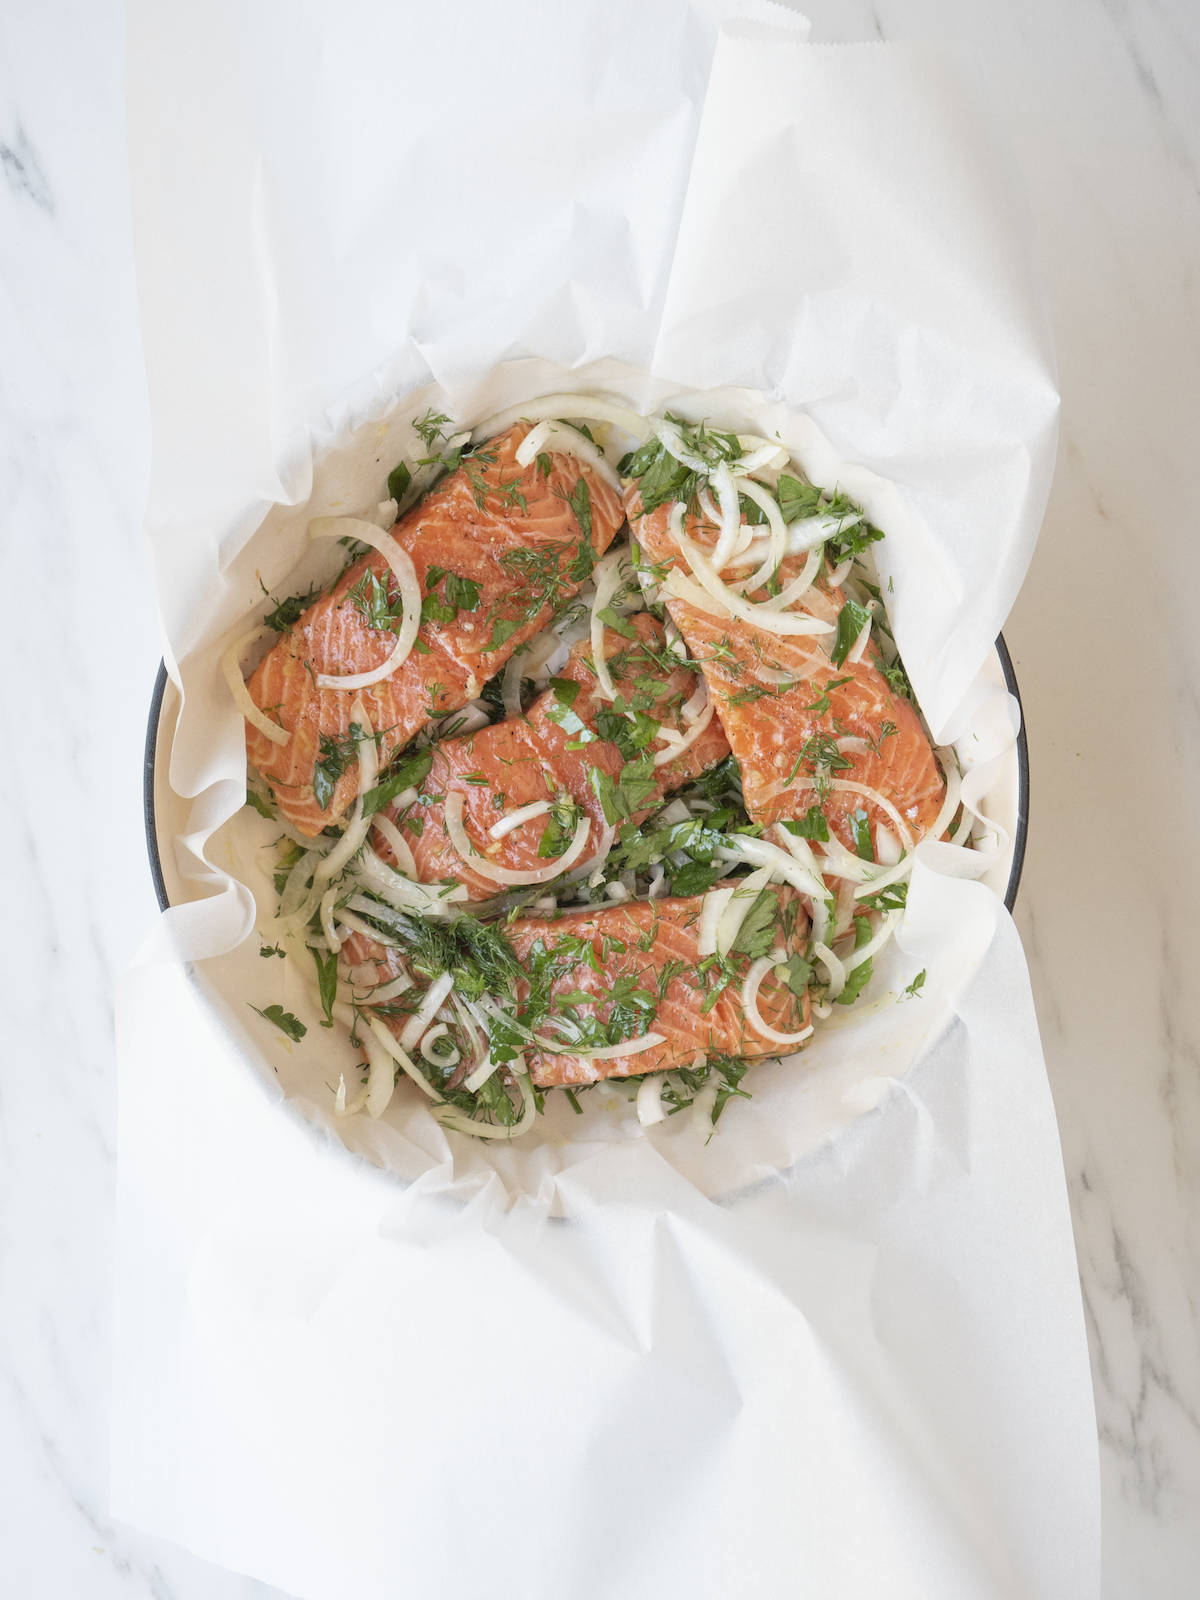 A skillet lined with parchment paper with the salmon fillets topped with herbs and sliced onions.